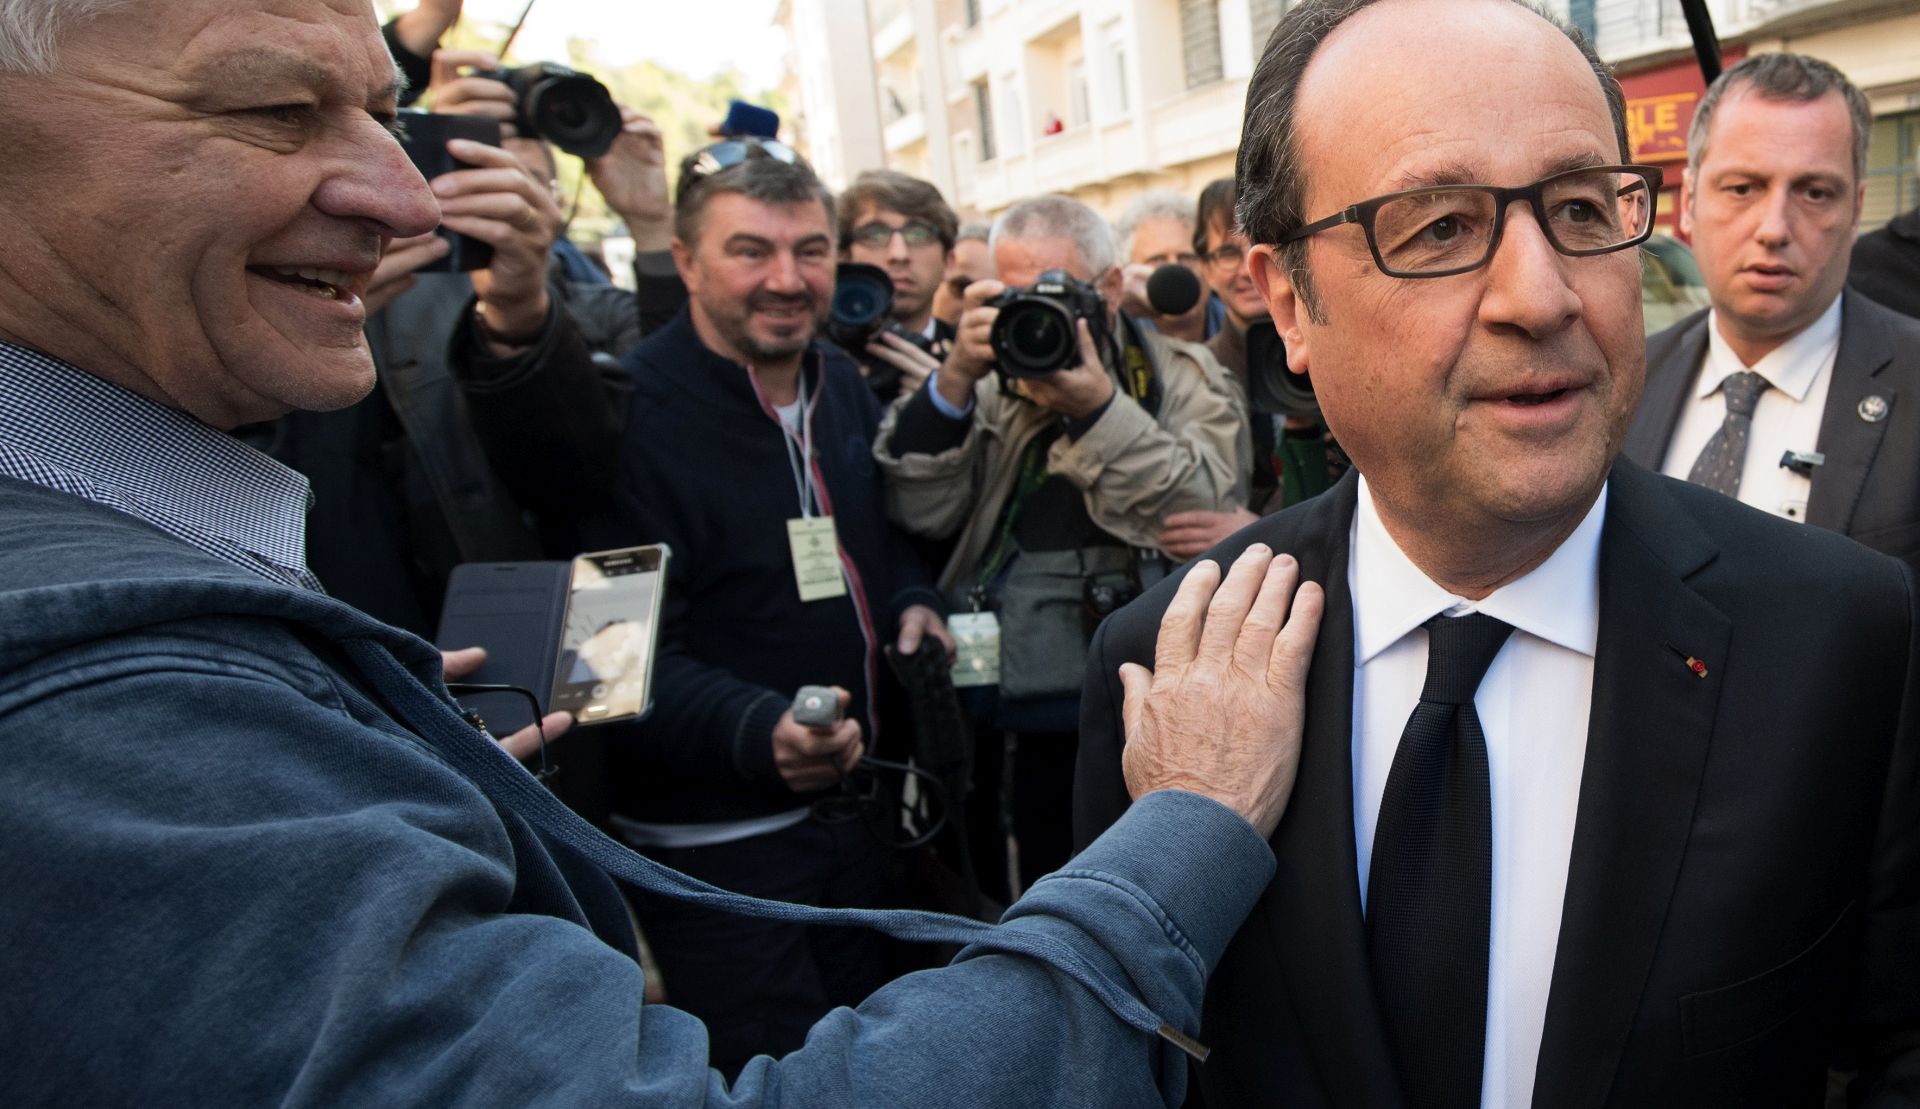 epa05922585 French President Francois Hollande (R) leaves the polling station after casting his ballot in the first round of 2017 French presidential elections at a polling station in Tulle, central France, 23 April 2017. Others are not identified. France goes to the polls in the secound round presidential election on 07 May 2017.  EPA/CAROLINE BLUMBERG